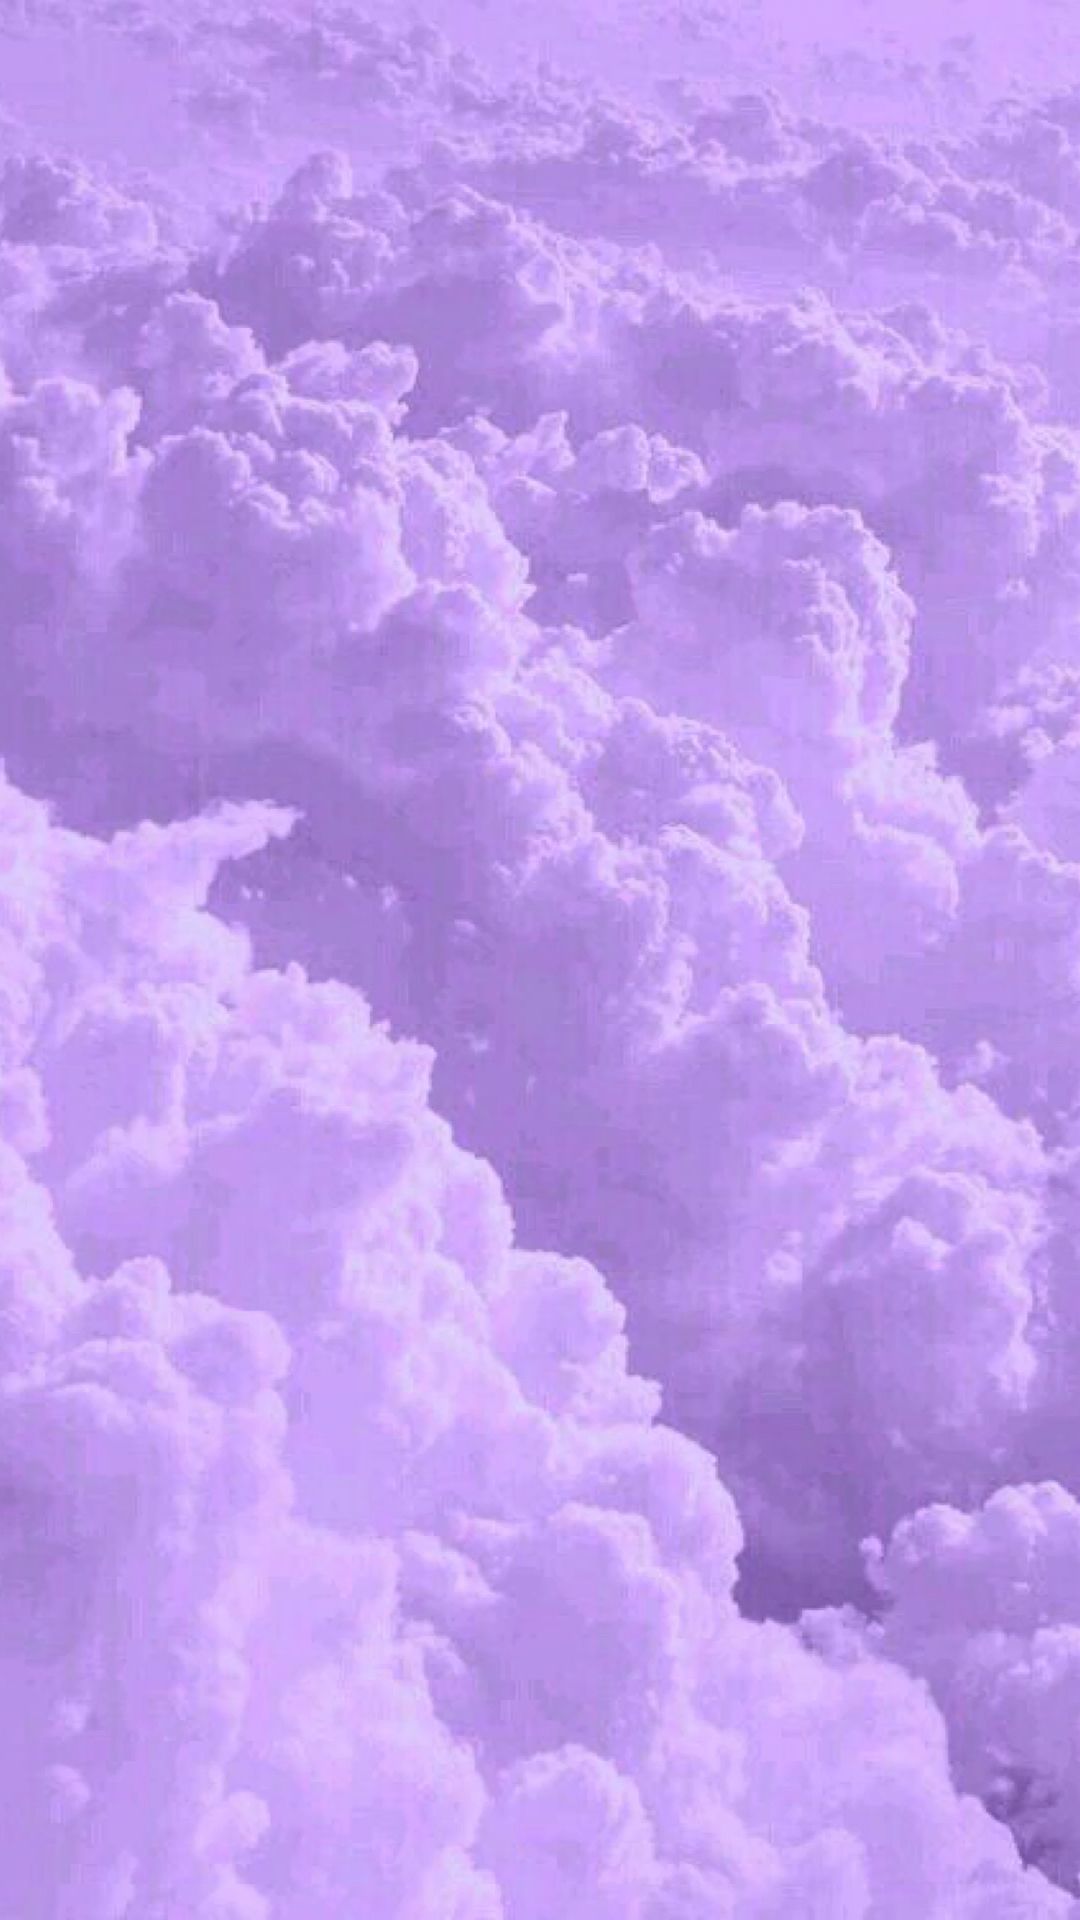 purple and aesthetic wallpaper!